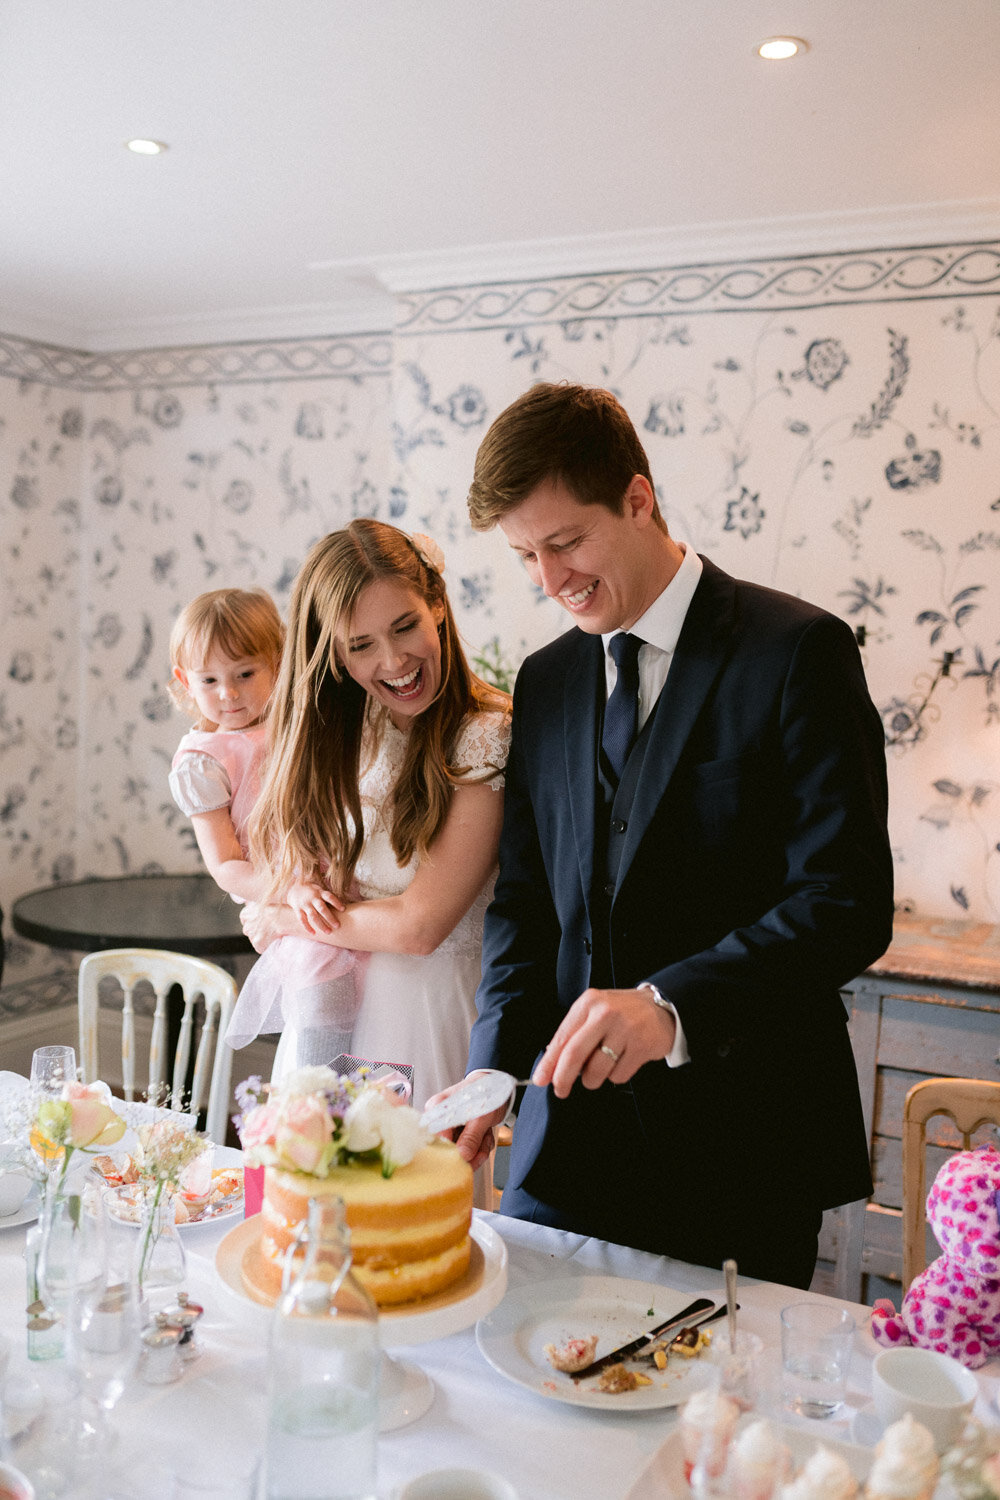 A small &amp; intimate Wedding in Kent